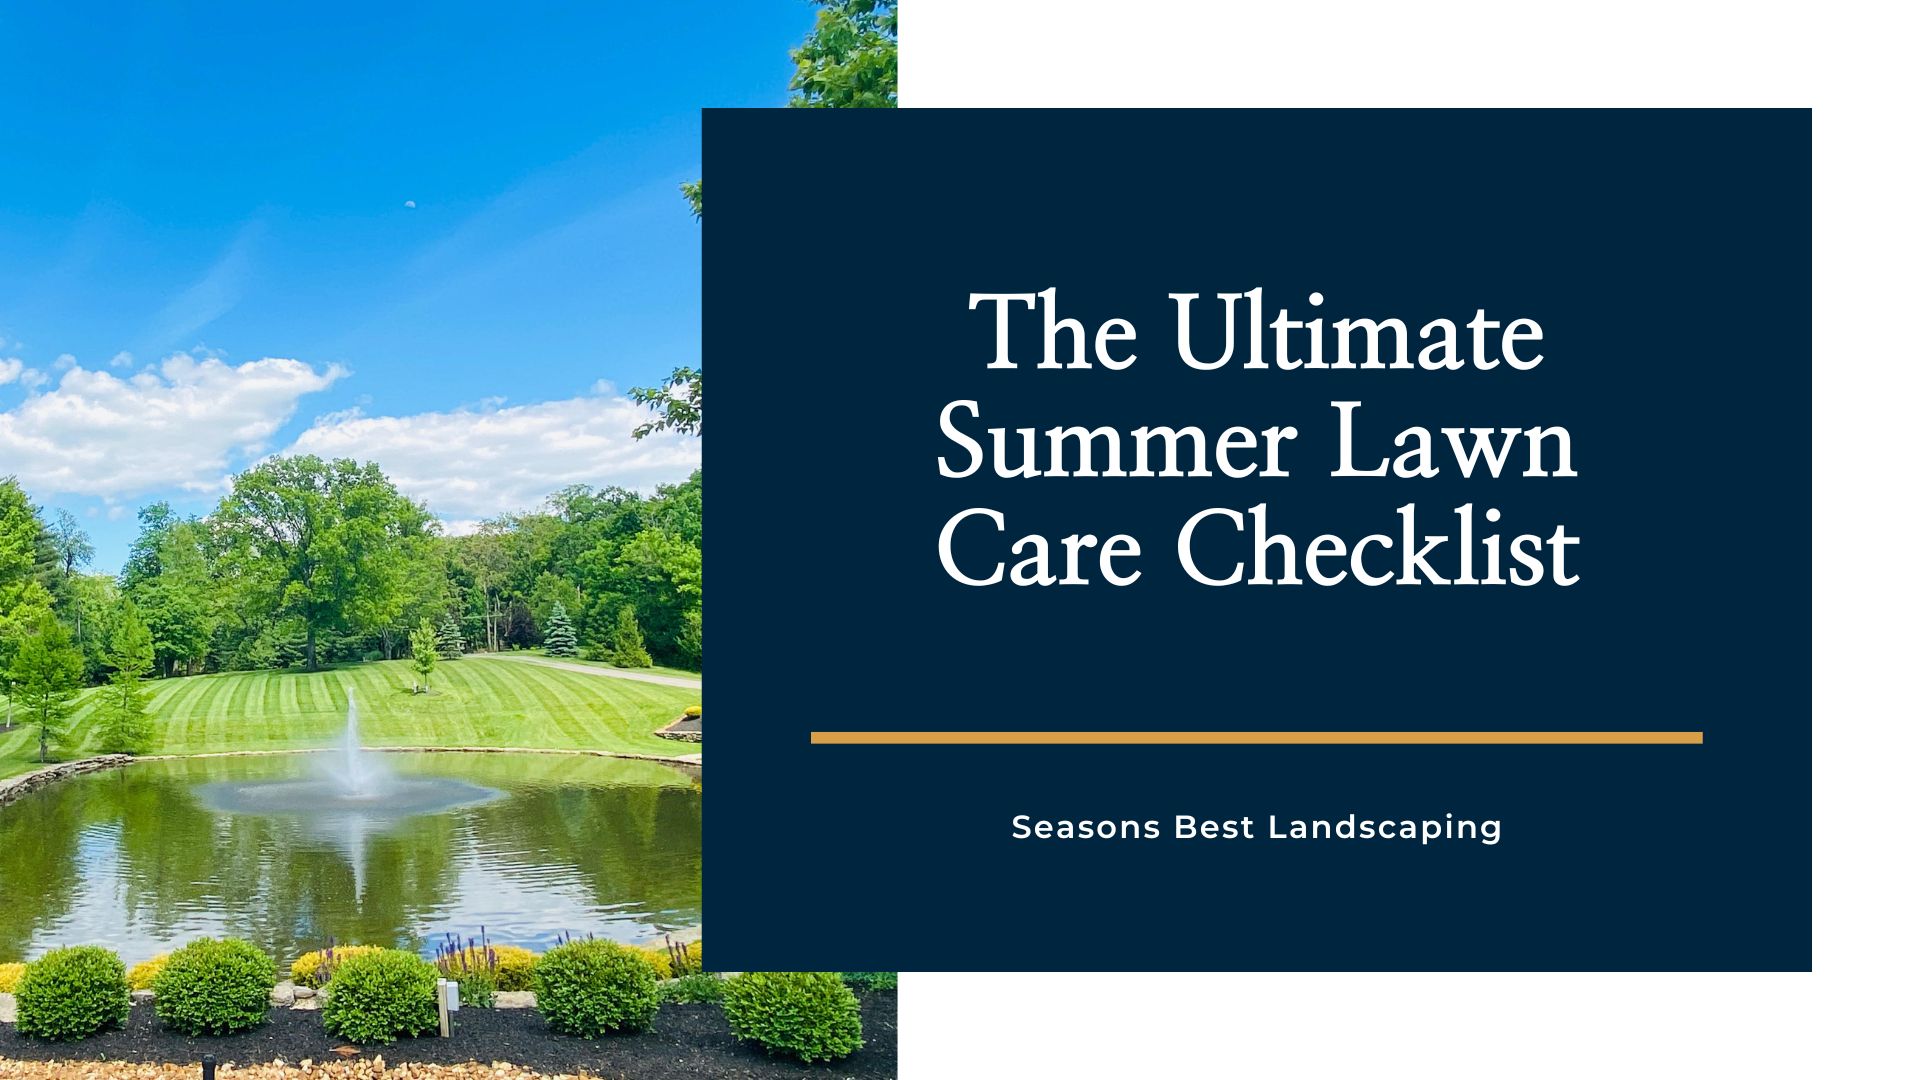 The Ultimate Summer Lawn Care Checklist: Keep Your Yard Looking Green and Lush All Season Long